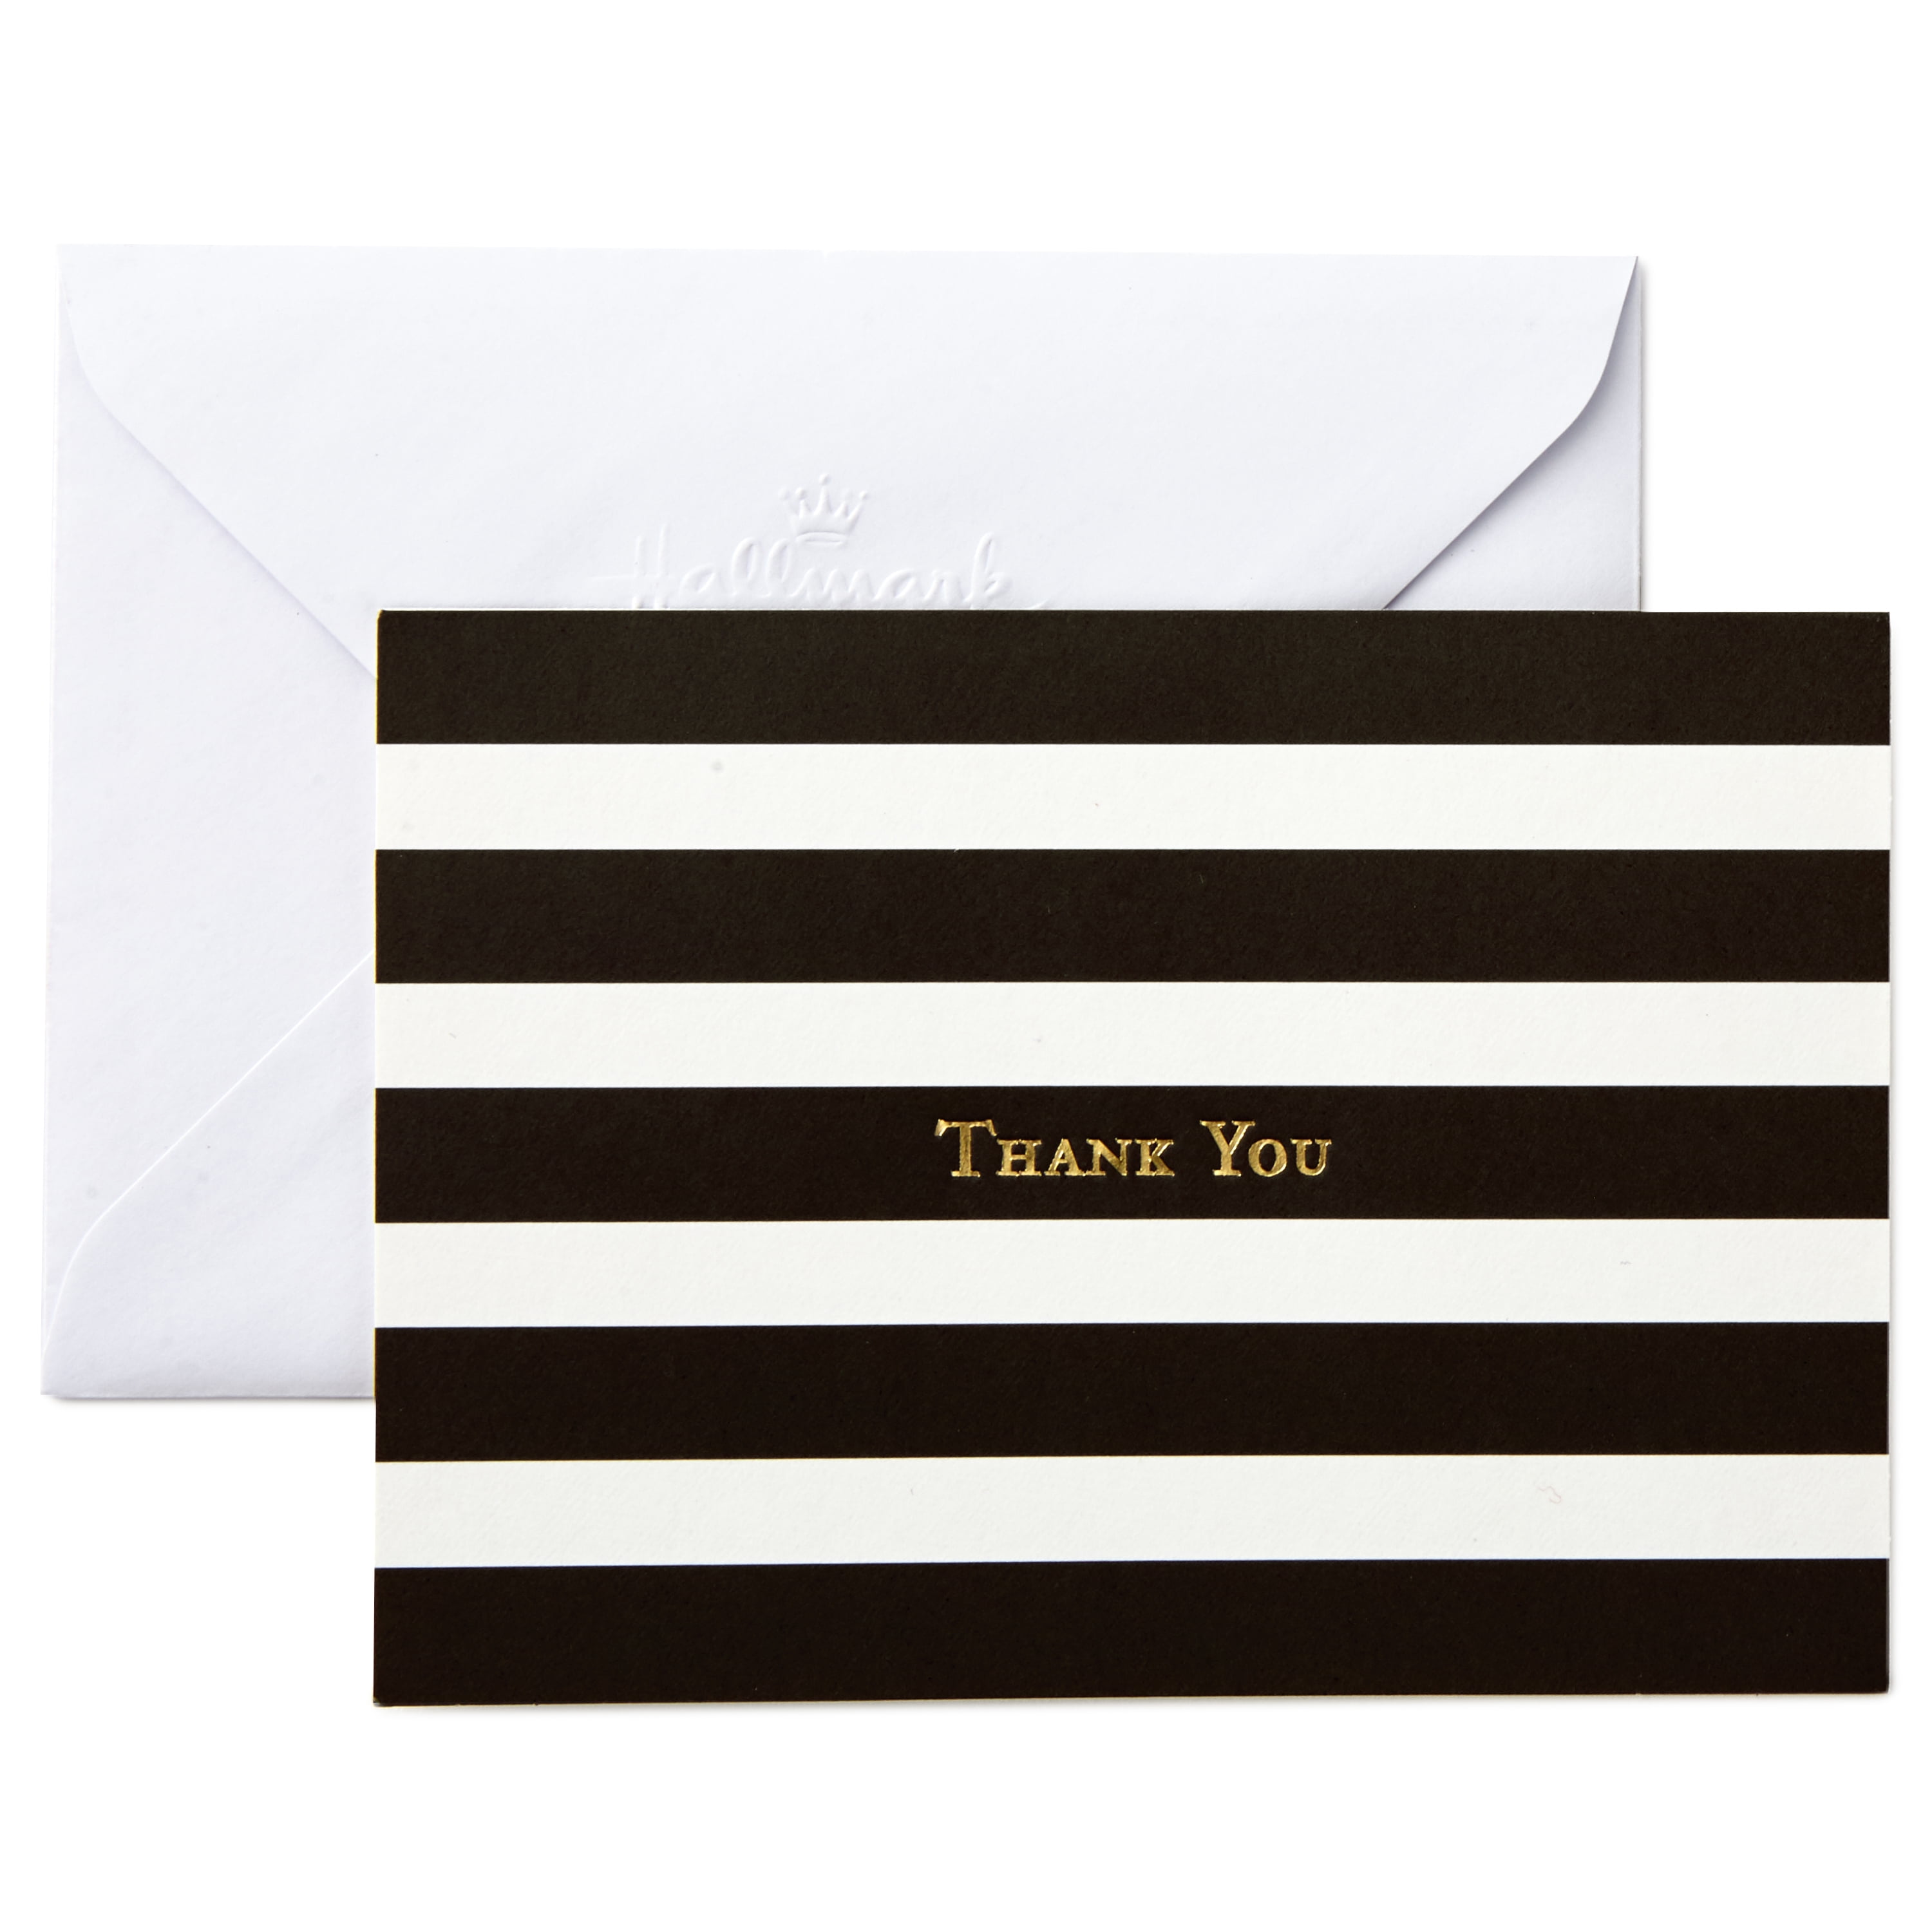 Classic Plaid Details about   Hallmark Thank You Cards 5CZE1865 10 Cards with Envelopes 